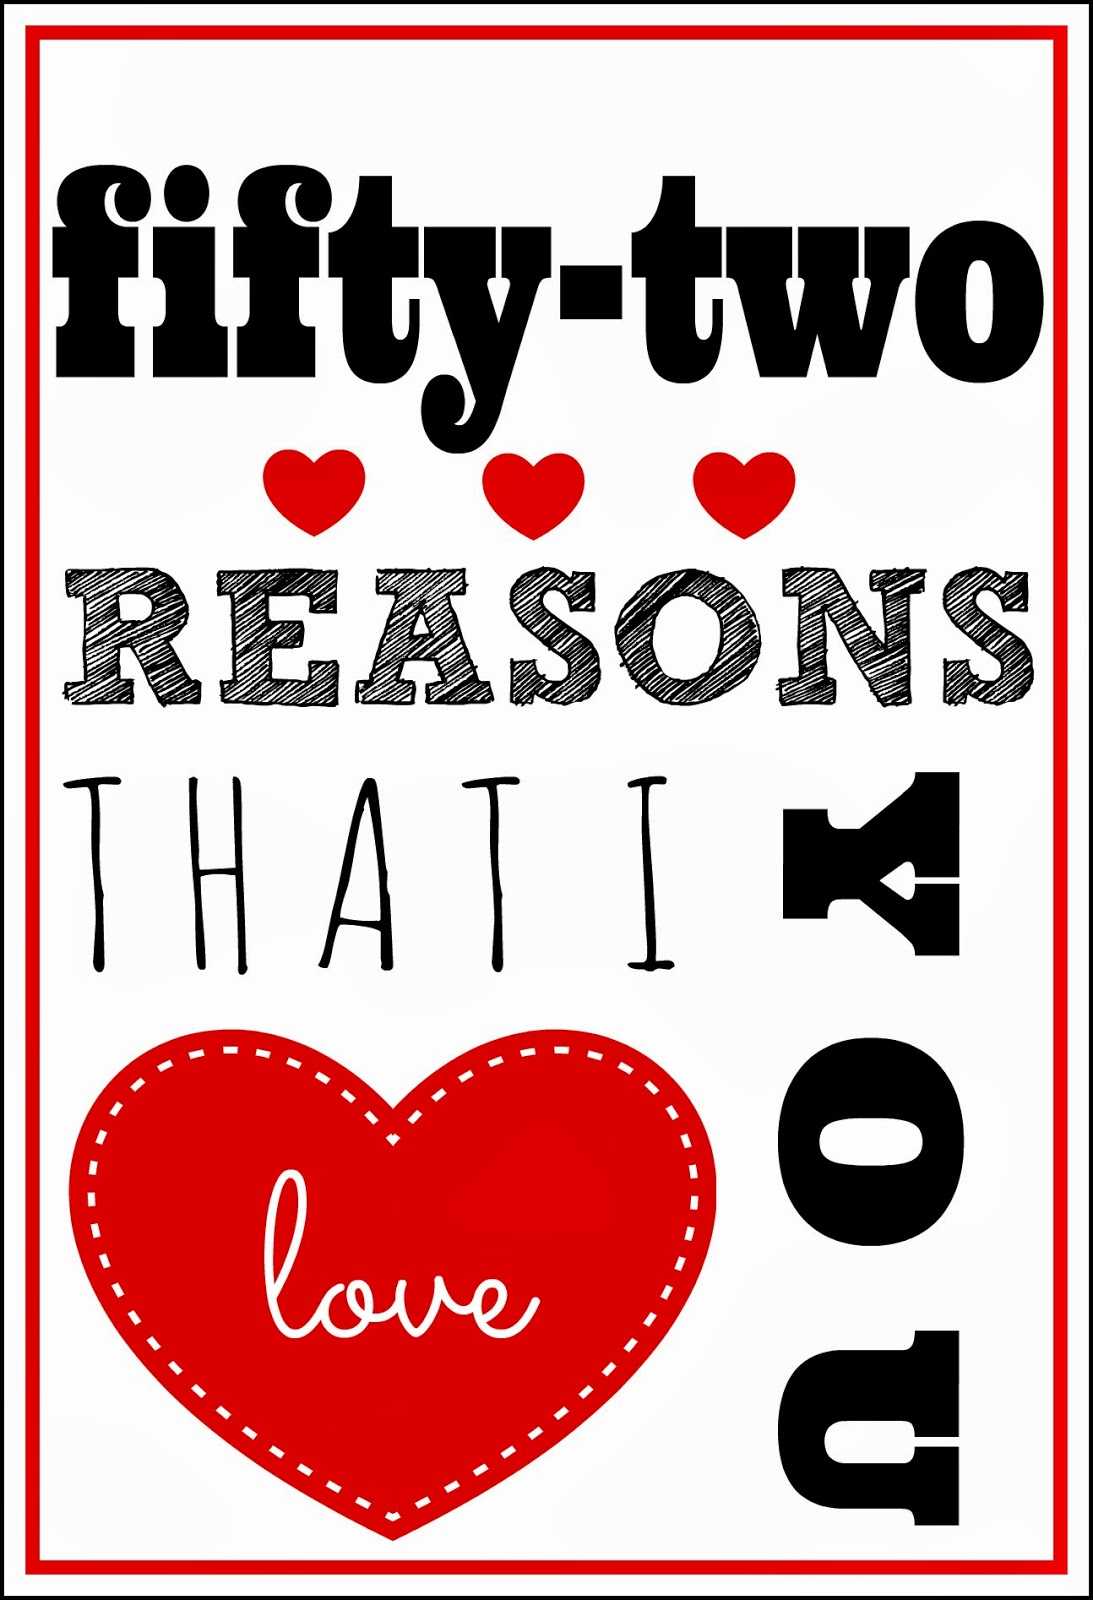 52 Reasons I Love You Template Free ] – 1000 Ideas About 52 With 52 Reasons Why I Love You Cards Templates